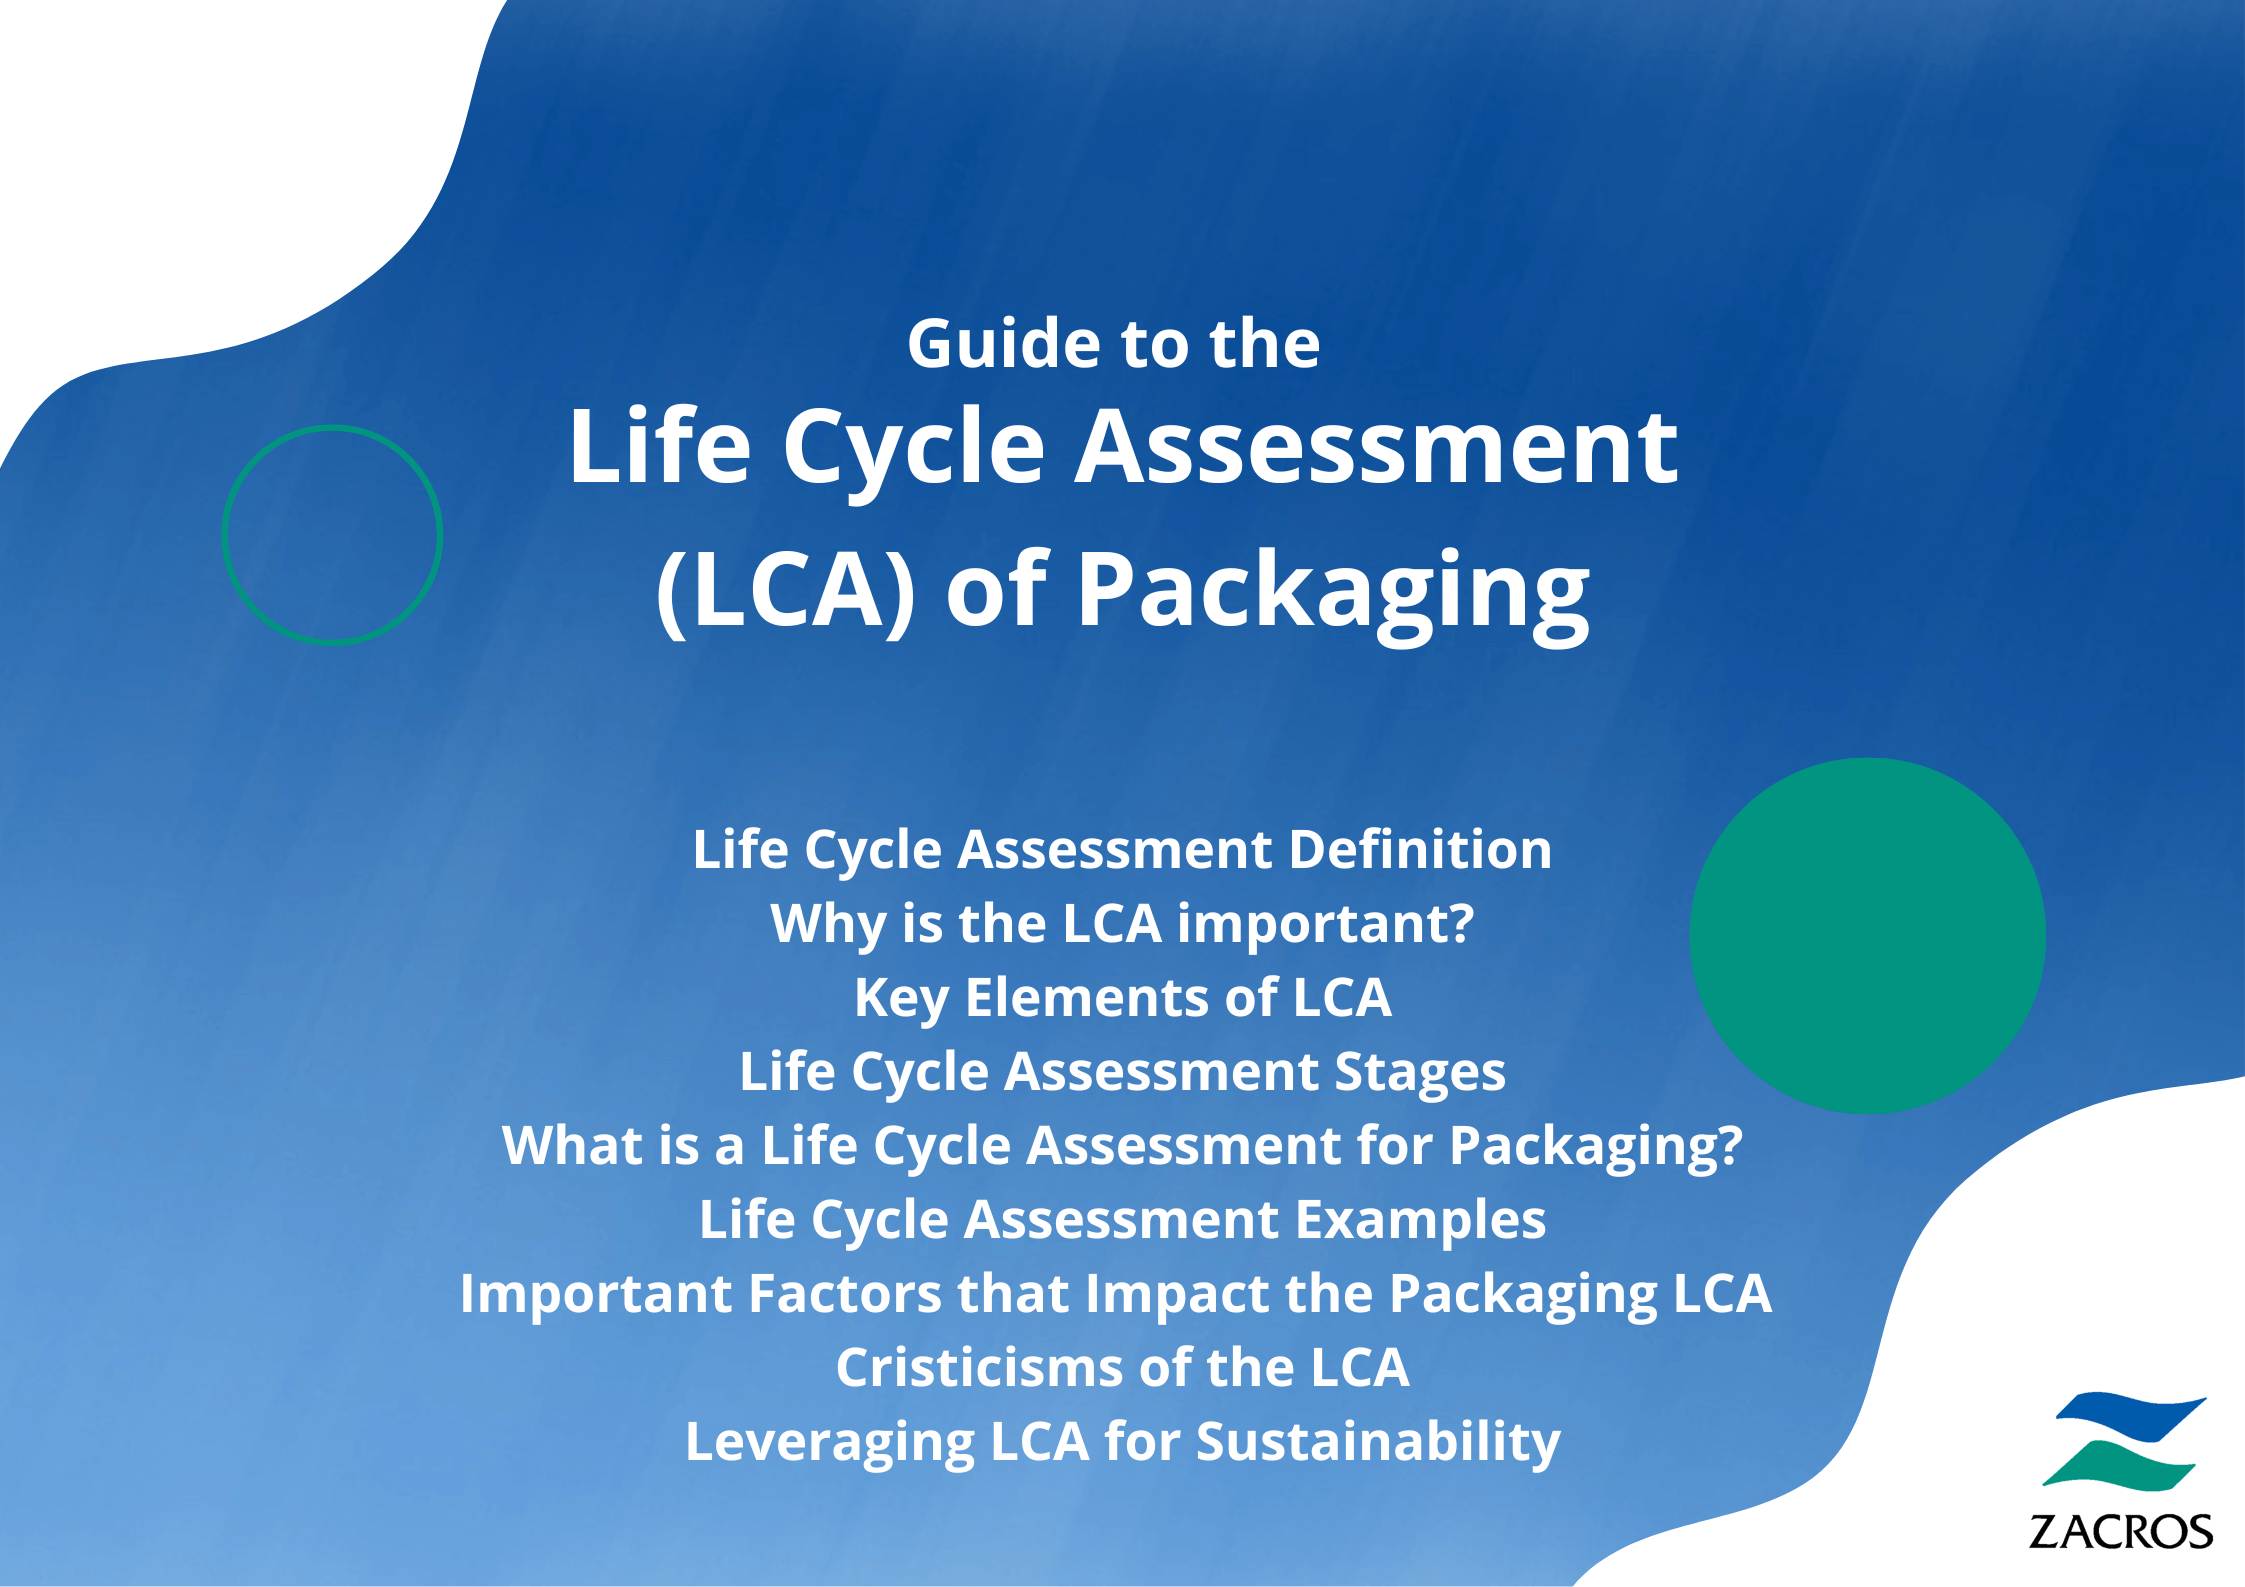 Guide to the Life Cycle Assessment of Packaging